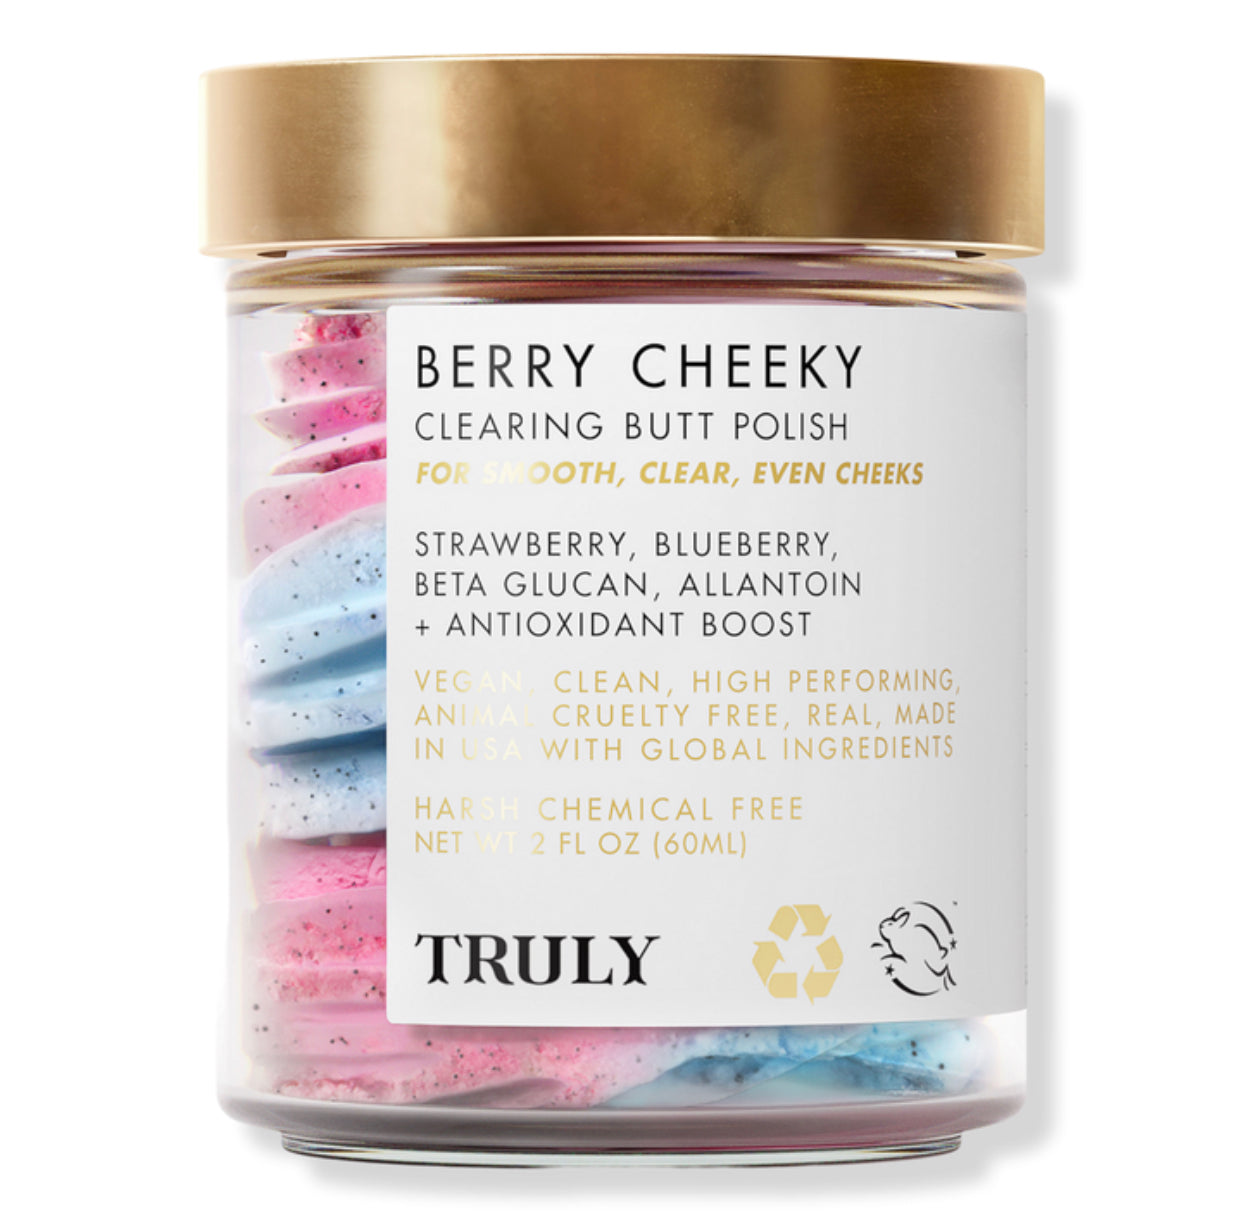 TRULY - Berry Cheeky Clearing Butt Polish | 60 mL